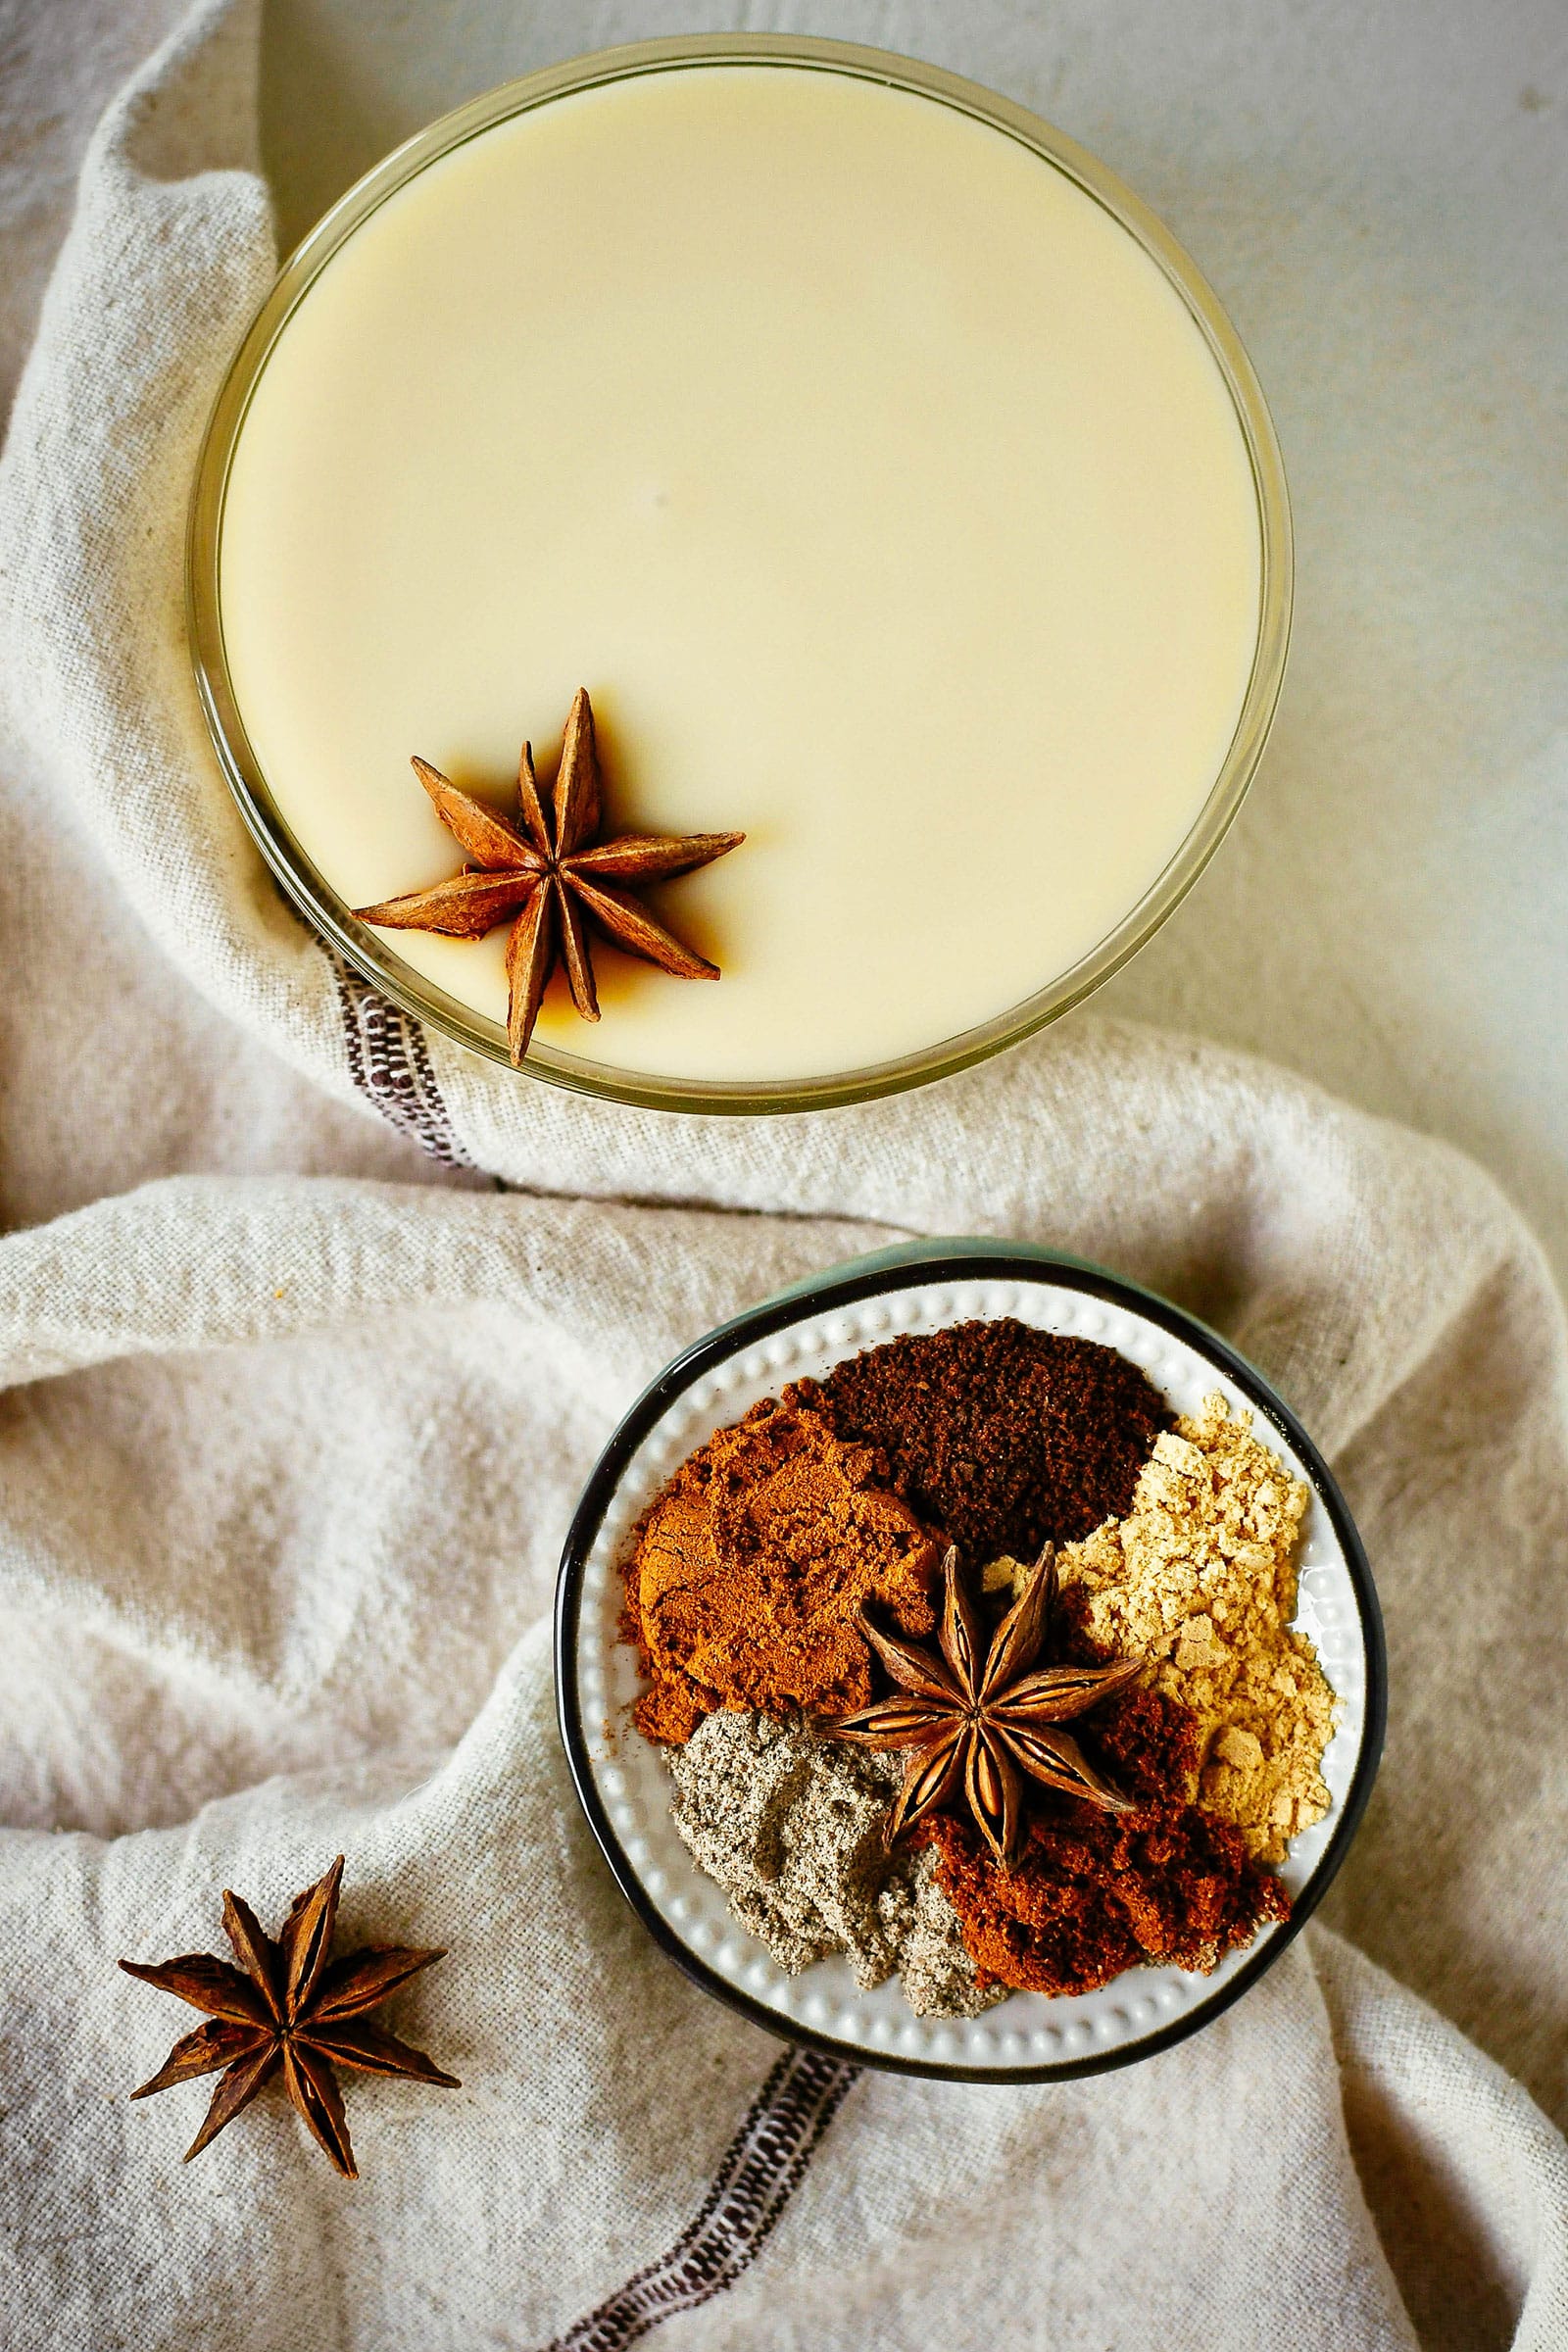 A glass bowl of condensed milk next to a small dish filled with ground chai spices, shot against a linen napkin background